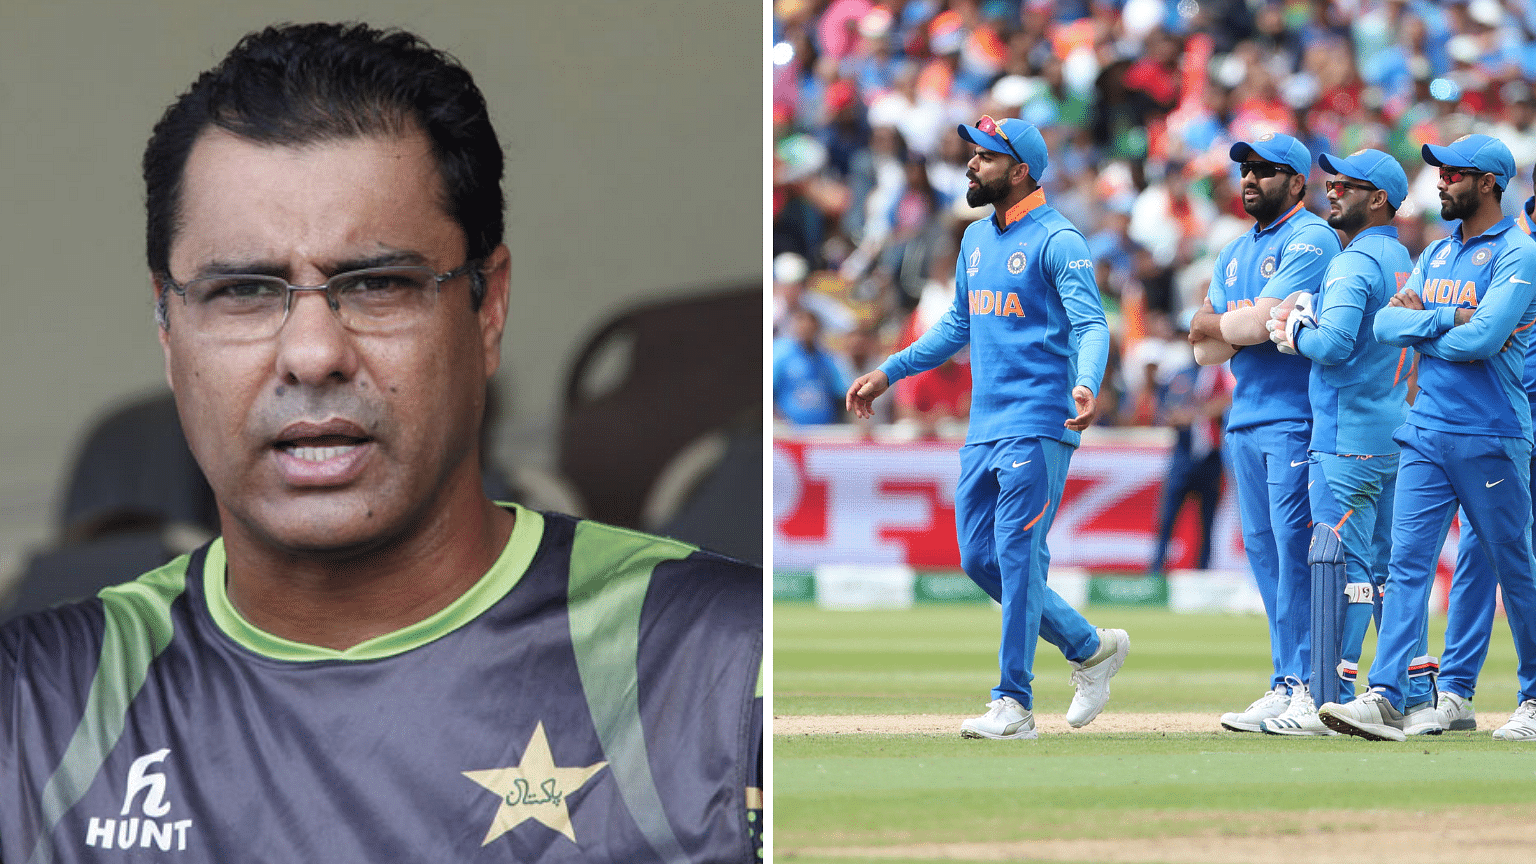 The likes of Waqar Younis, Rashid Latif and Moin Khan criticized India after their World Cup exit.&nbsp; &nbsp;